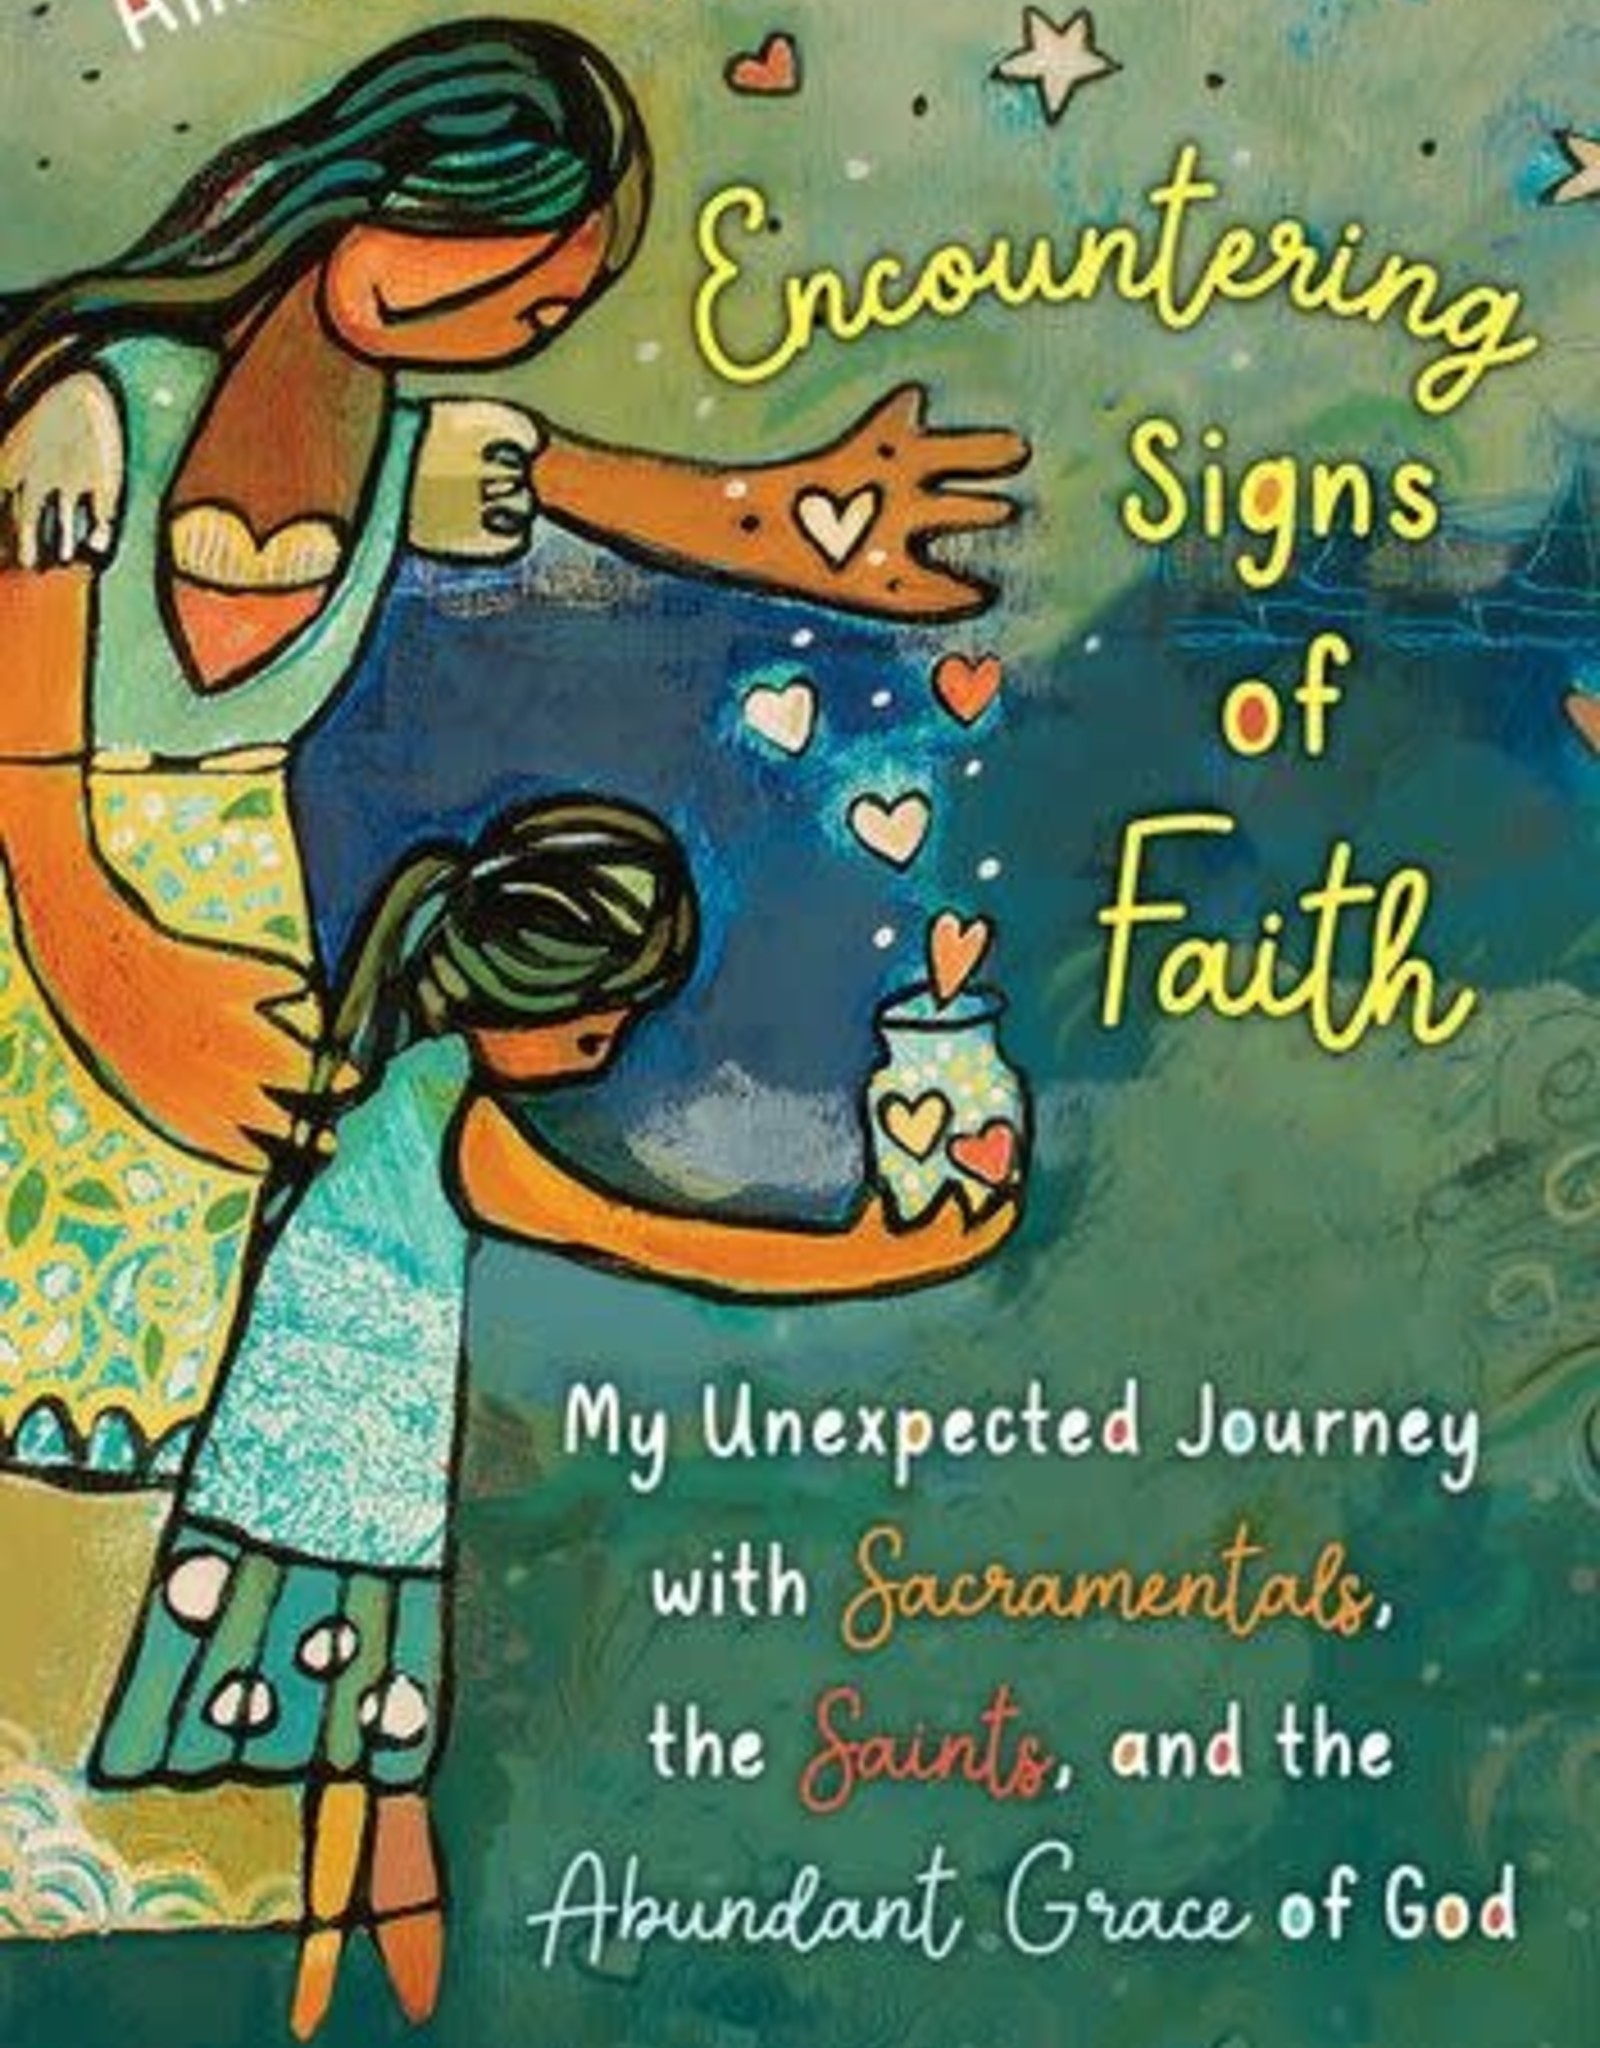 Encountering Signs of Faith, by Allison Gingras